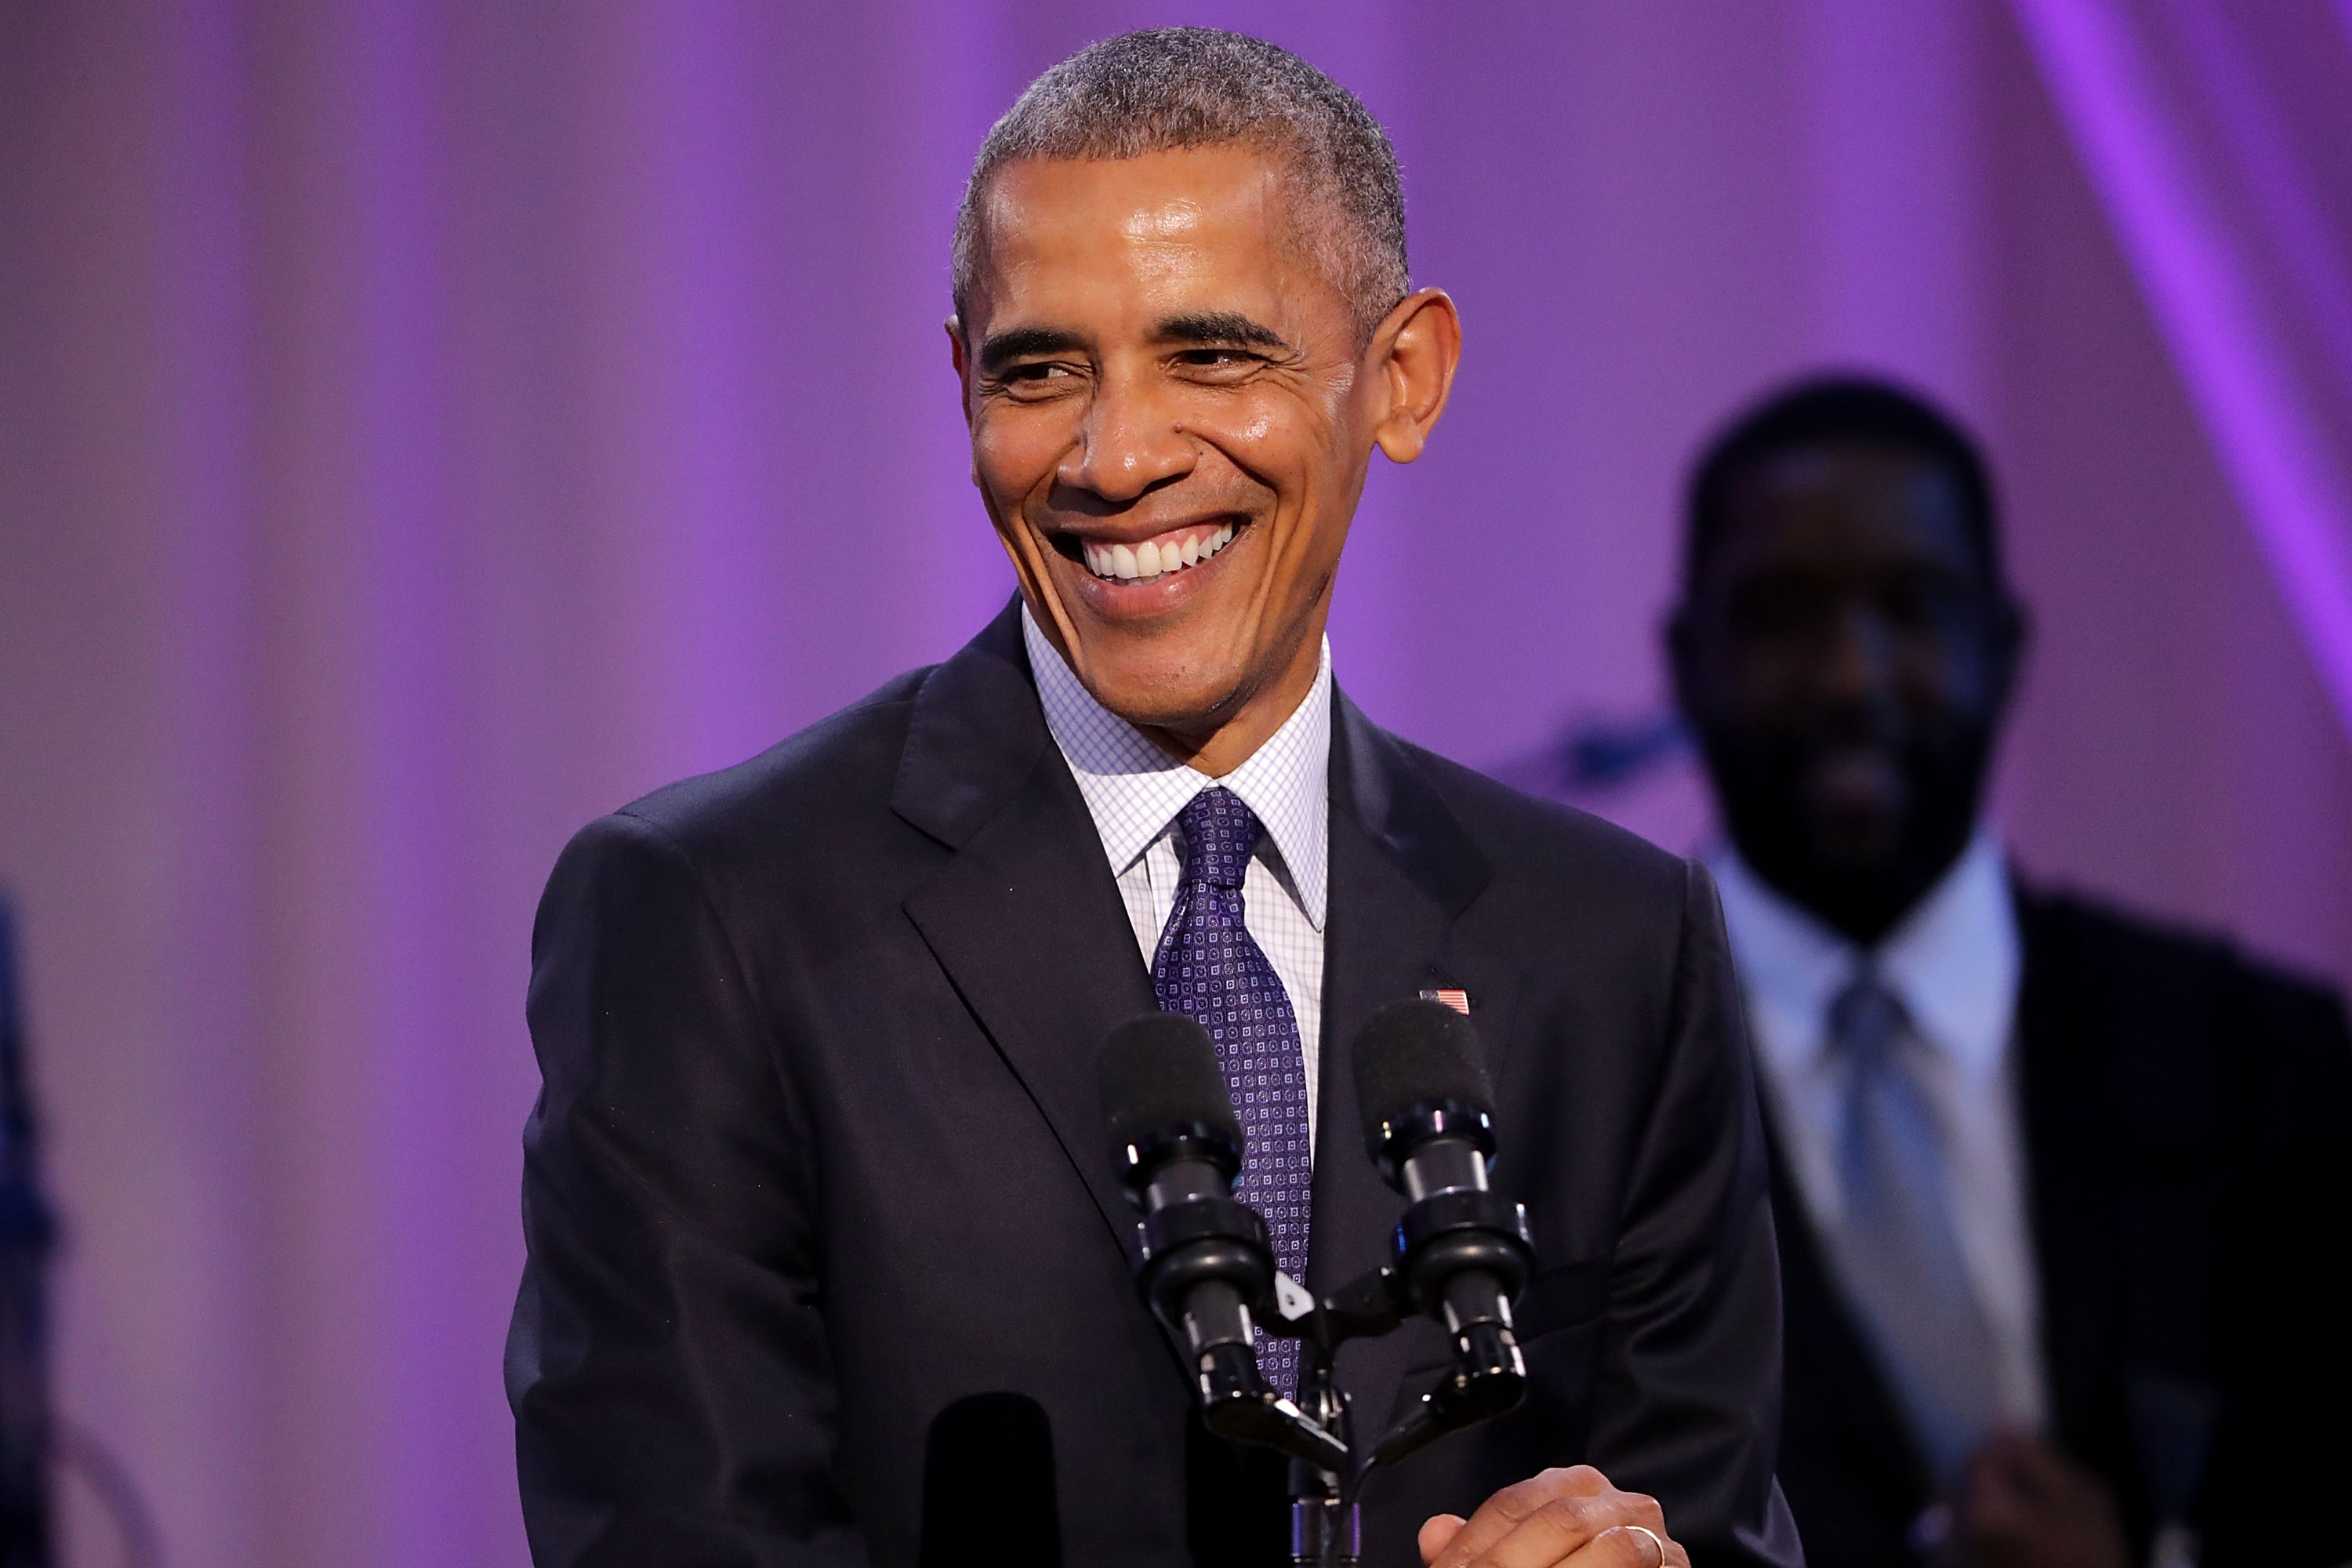 President Barack Obama during the BET's <i>Love and Happiness: A Musical Experience</i> on the South Lawn of the White House on Oct. 21, 2016, in Washington, D.C. (Chip Somodevilla—Getty Images)